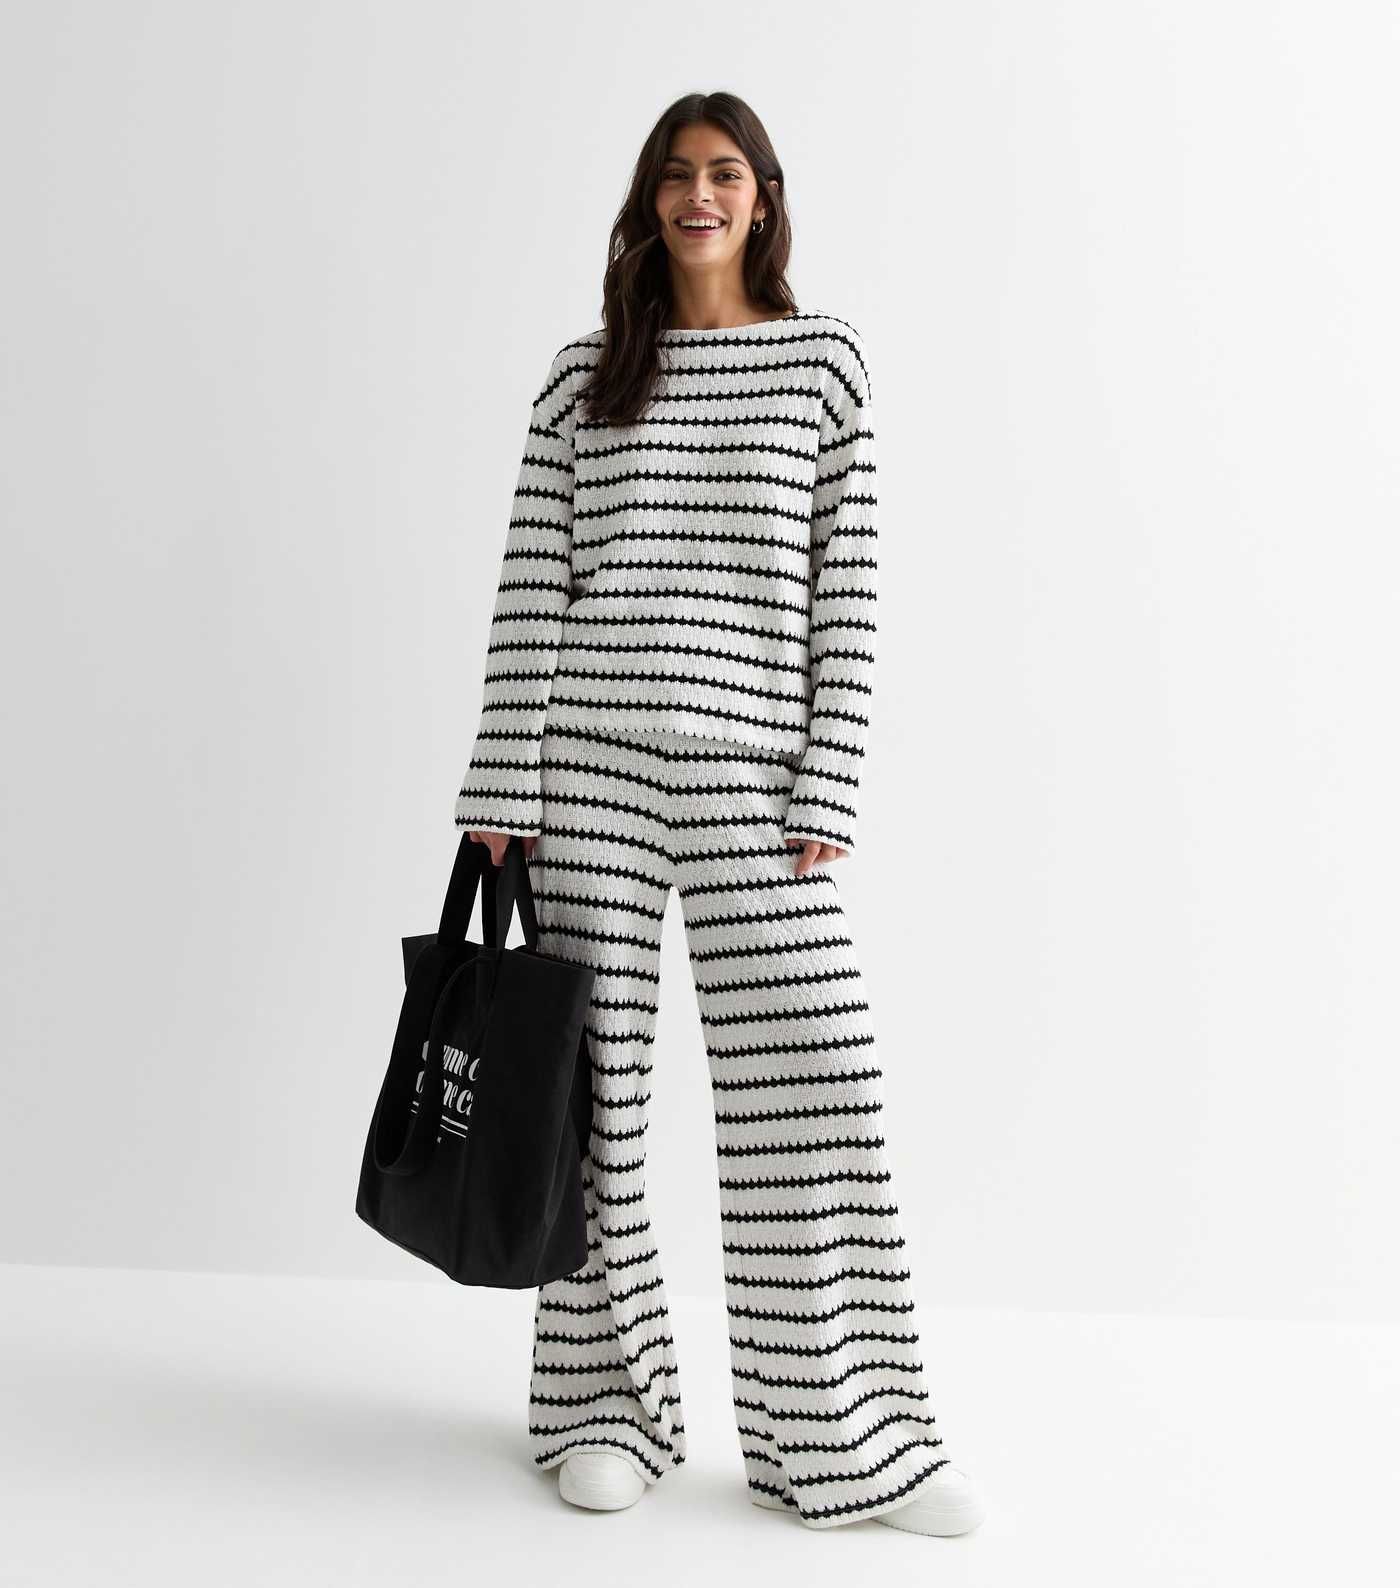 White Stripe Stitch Knit Jumper
						
						Add to Saved Items
						Remove from Saved Items | New Look (UK)